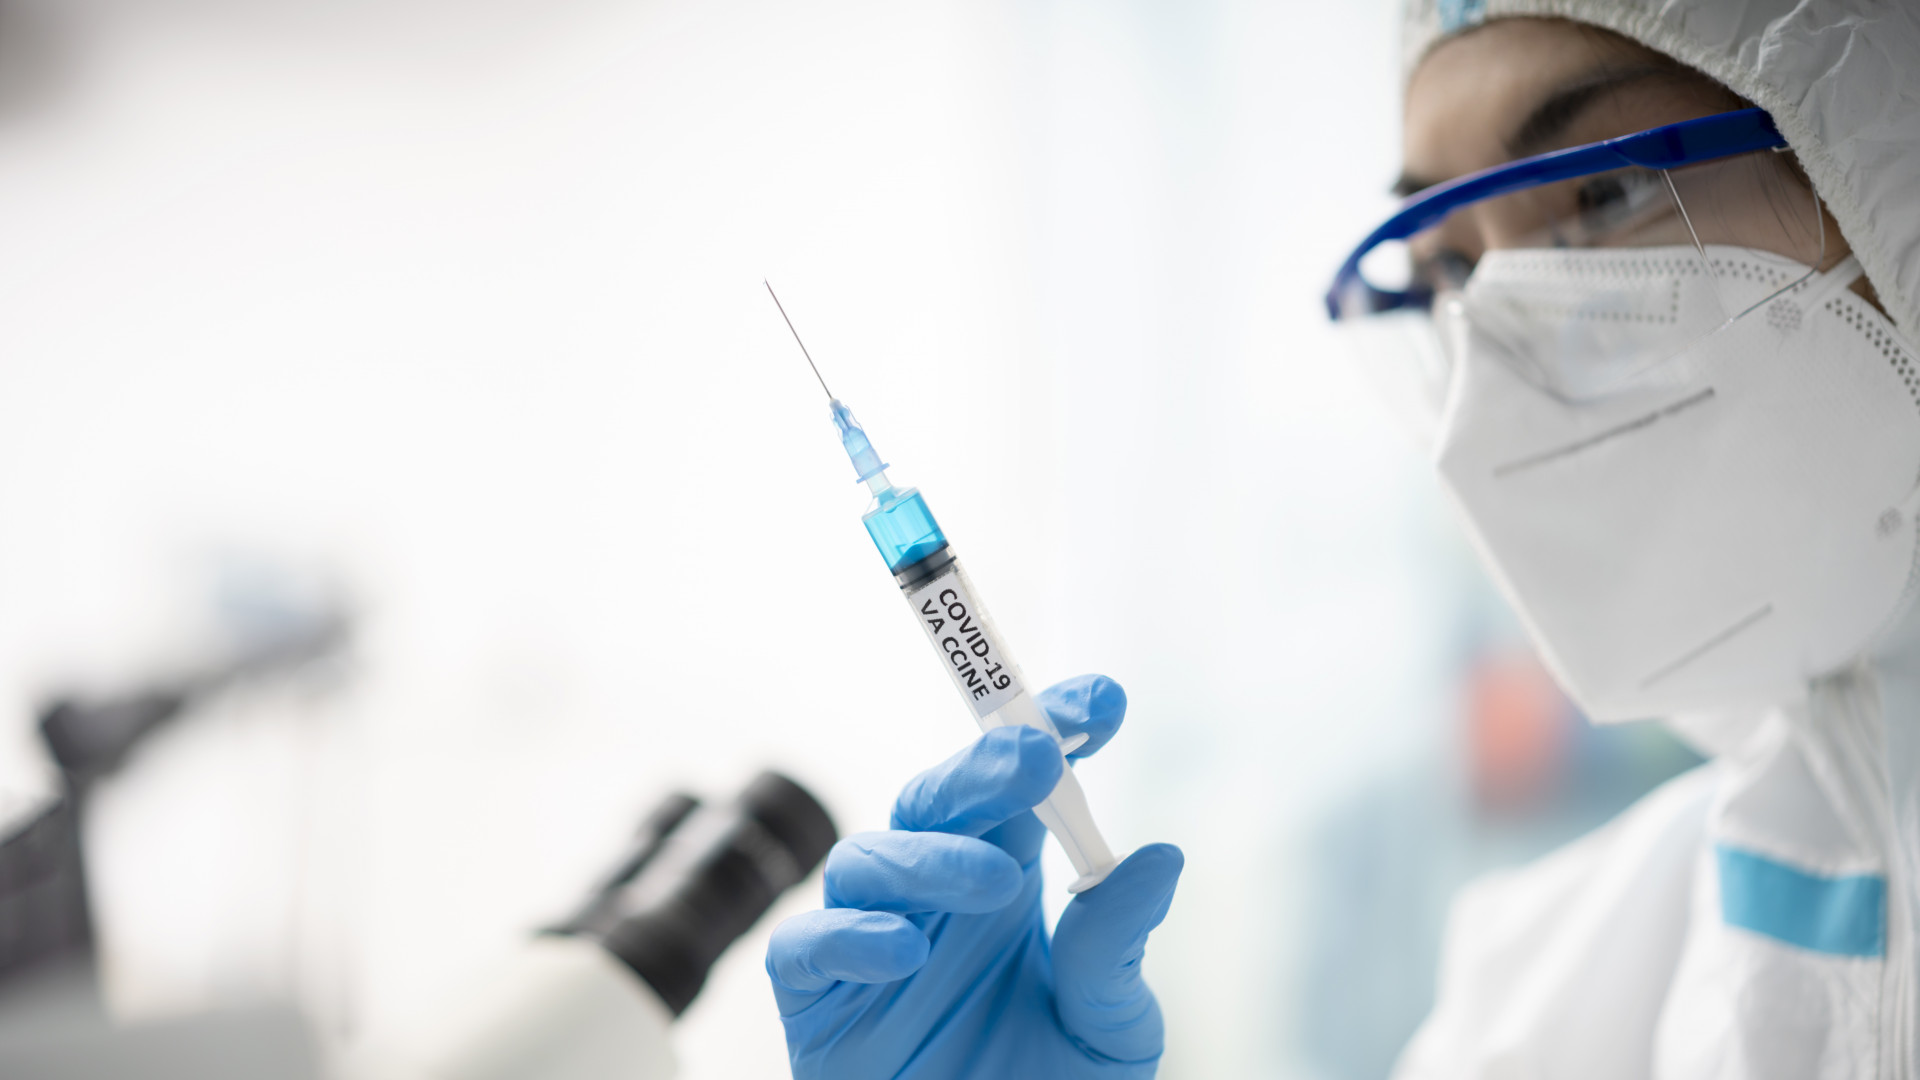 A "100%" Russian vaccine can provide protection for one year